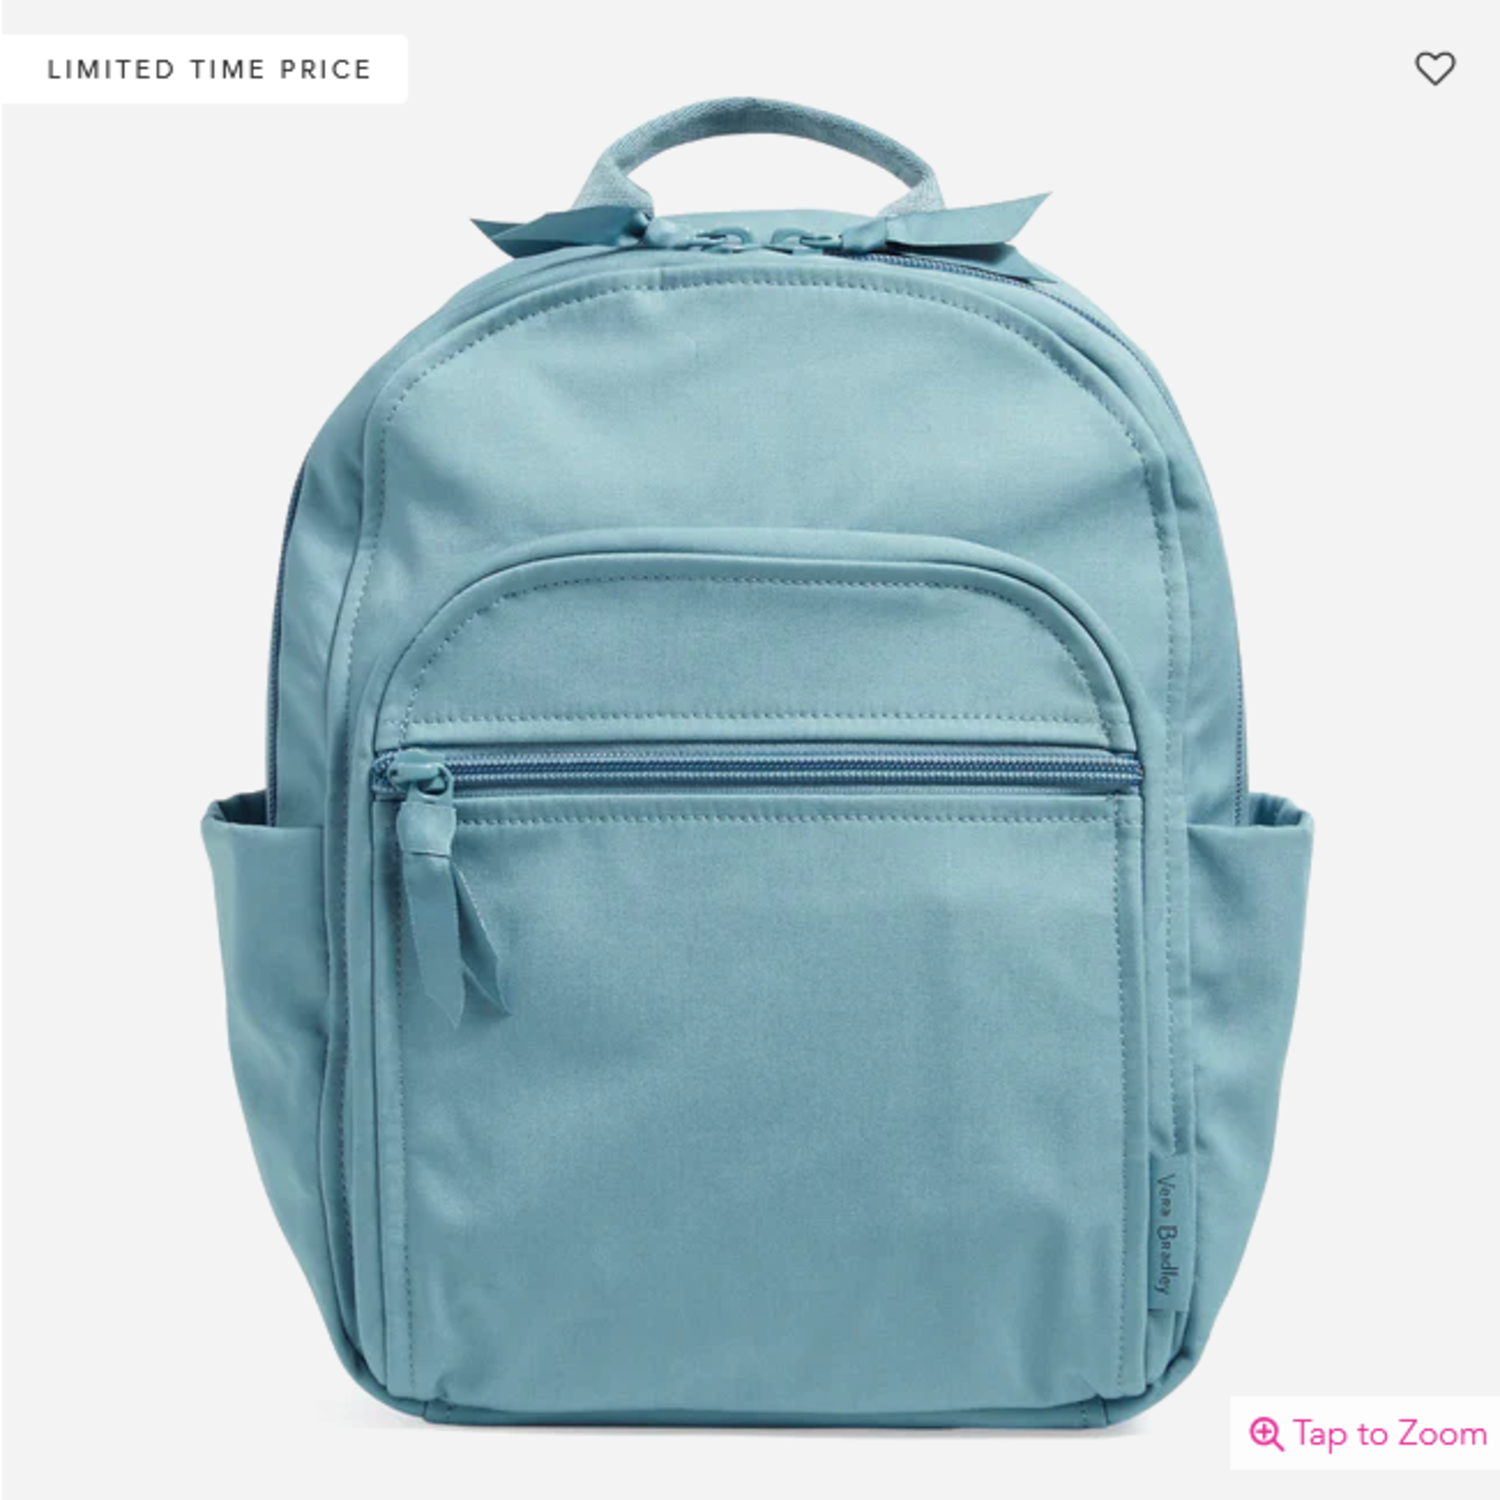 Small Backpack : Reef Water Blue - Heart and Home Gifts and Accessories